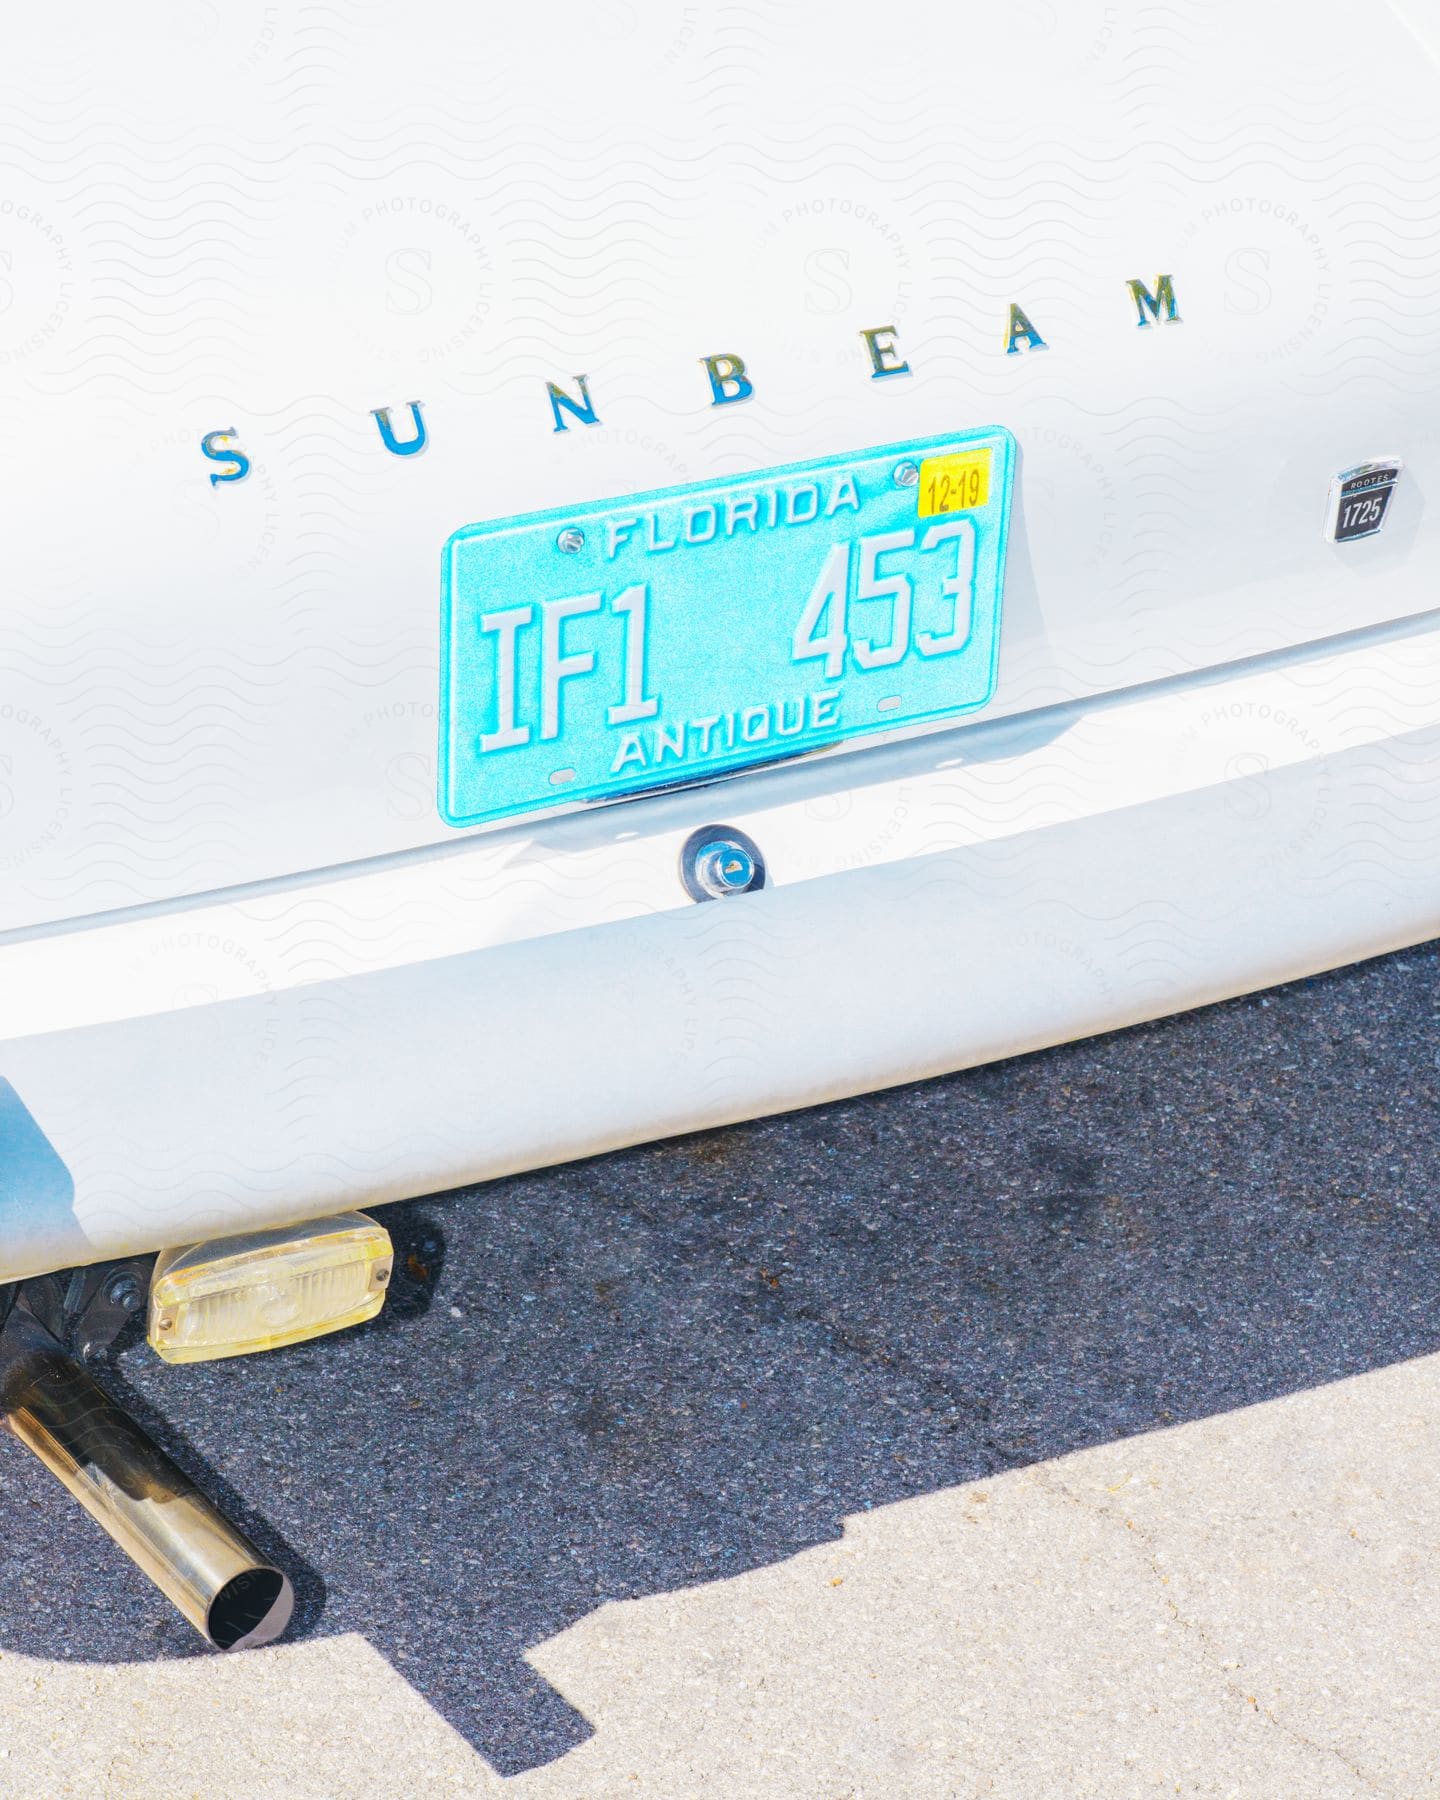 Florida license plate on rear of white sunbeam vehicle